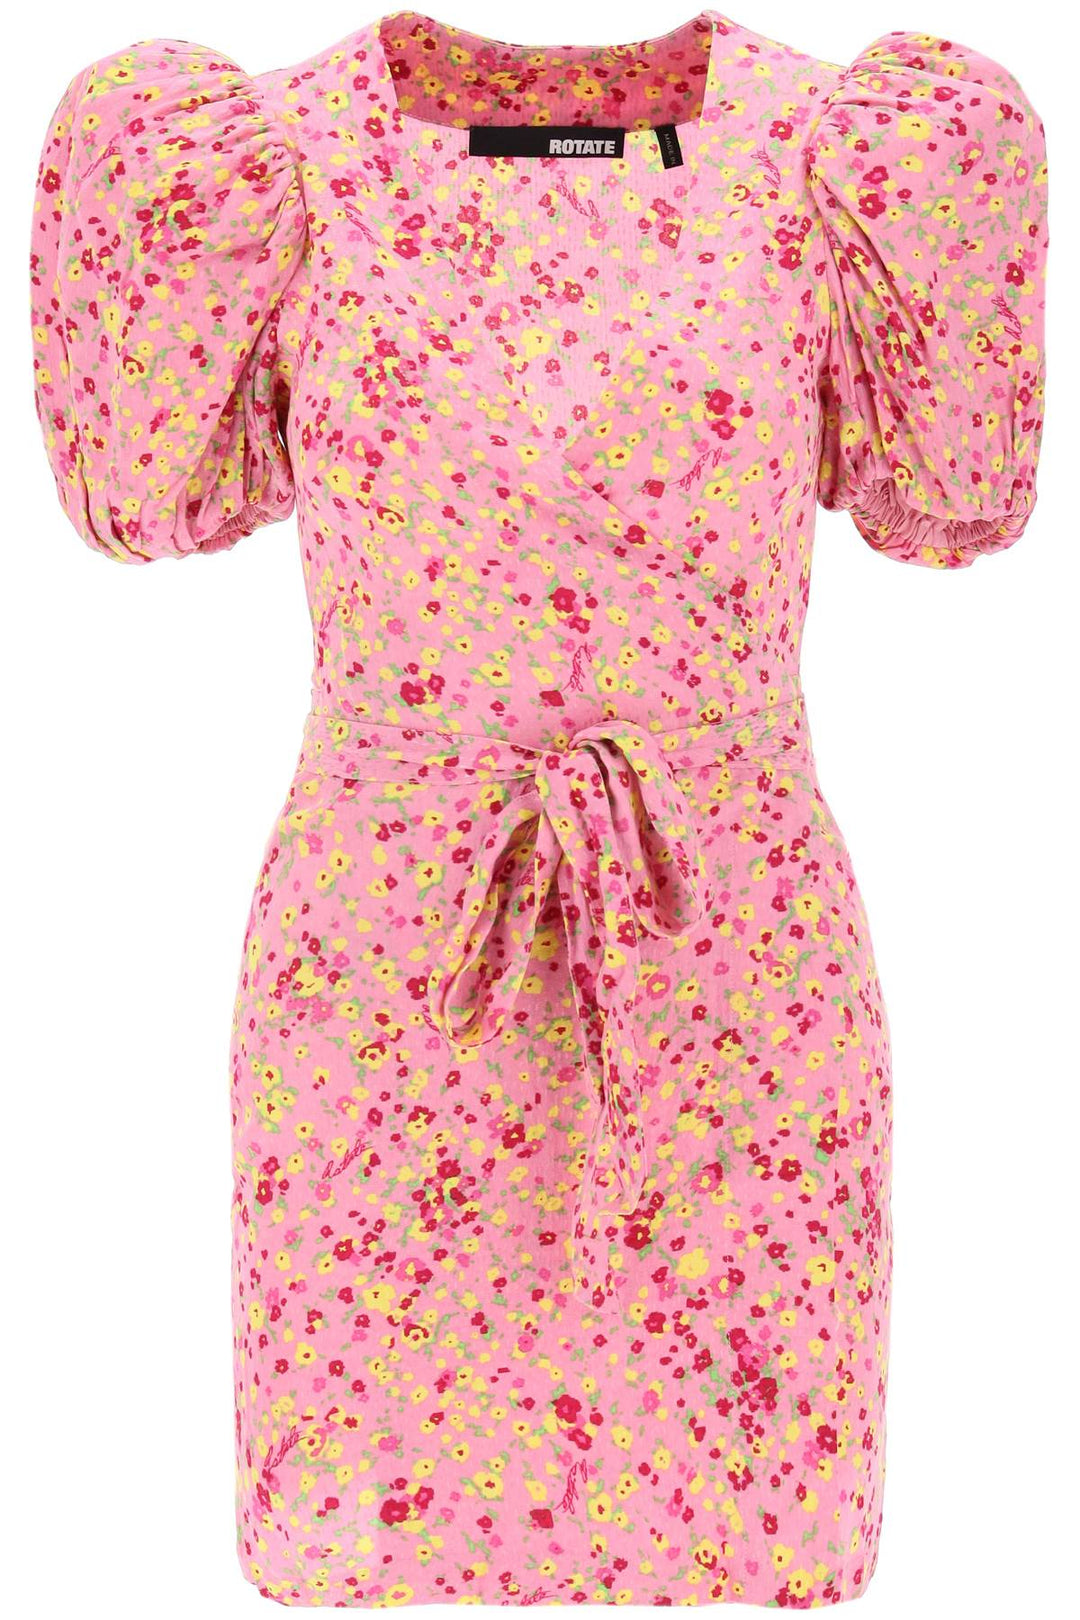 Rotate Mini Wrap Dress With Balloon Sleeves   Pink